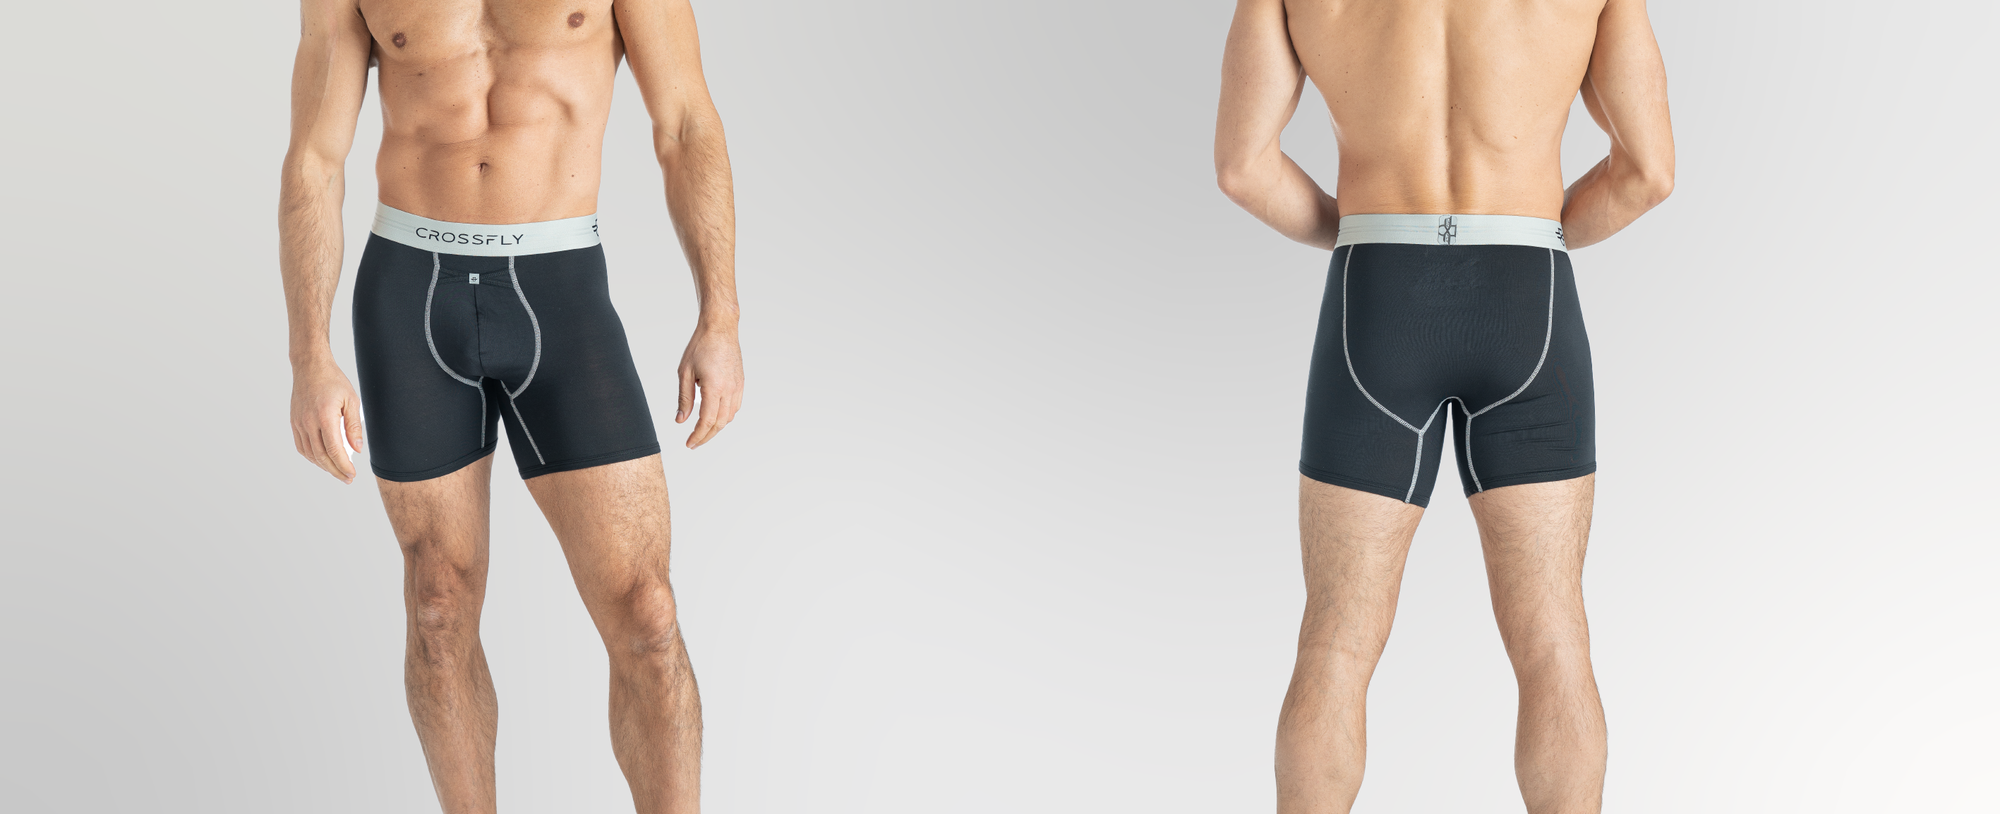 What is the healthiest and coolest type of men's underwear